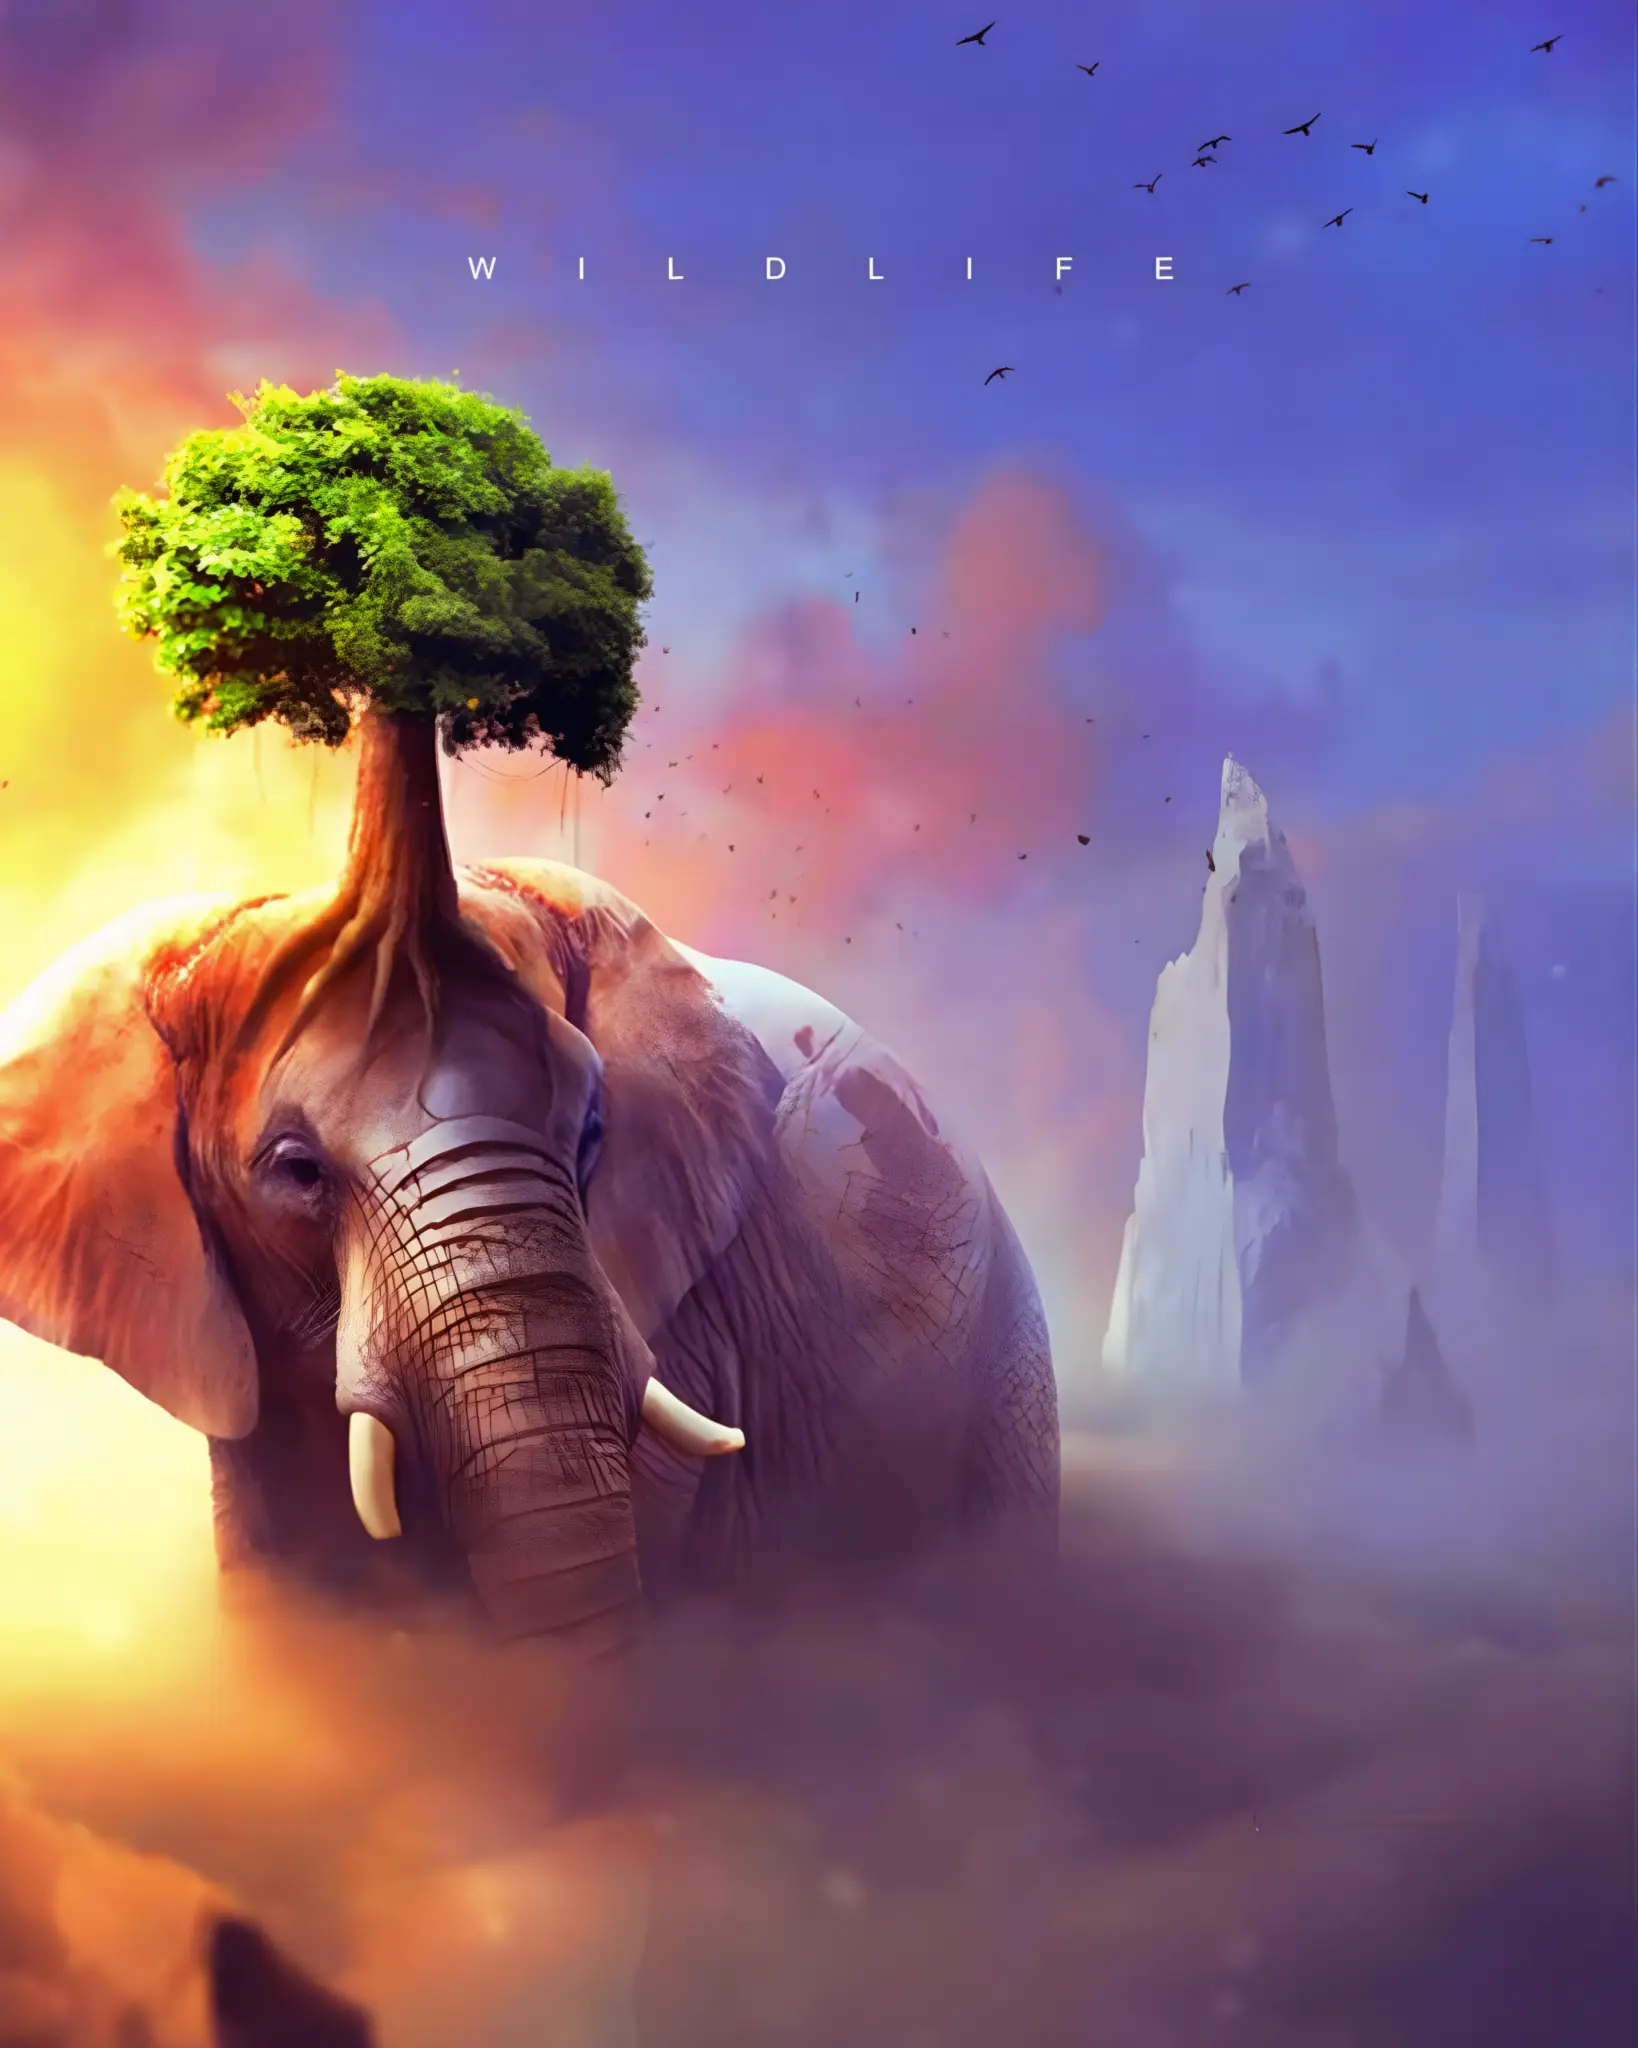 You are currently viewing Elephant picsart editing background download